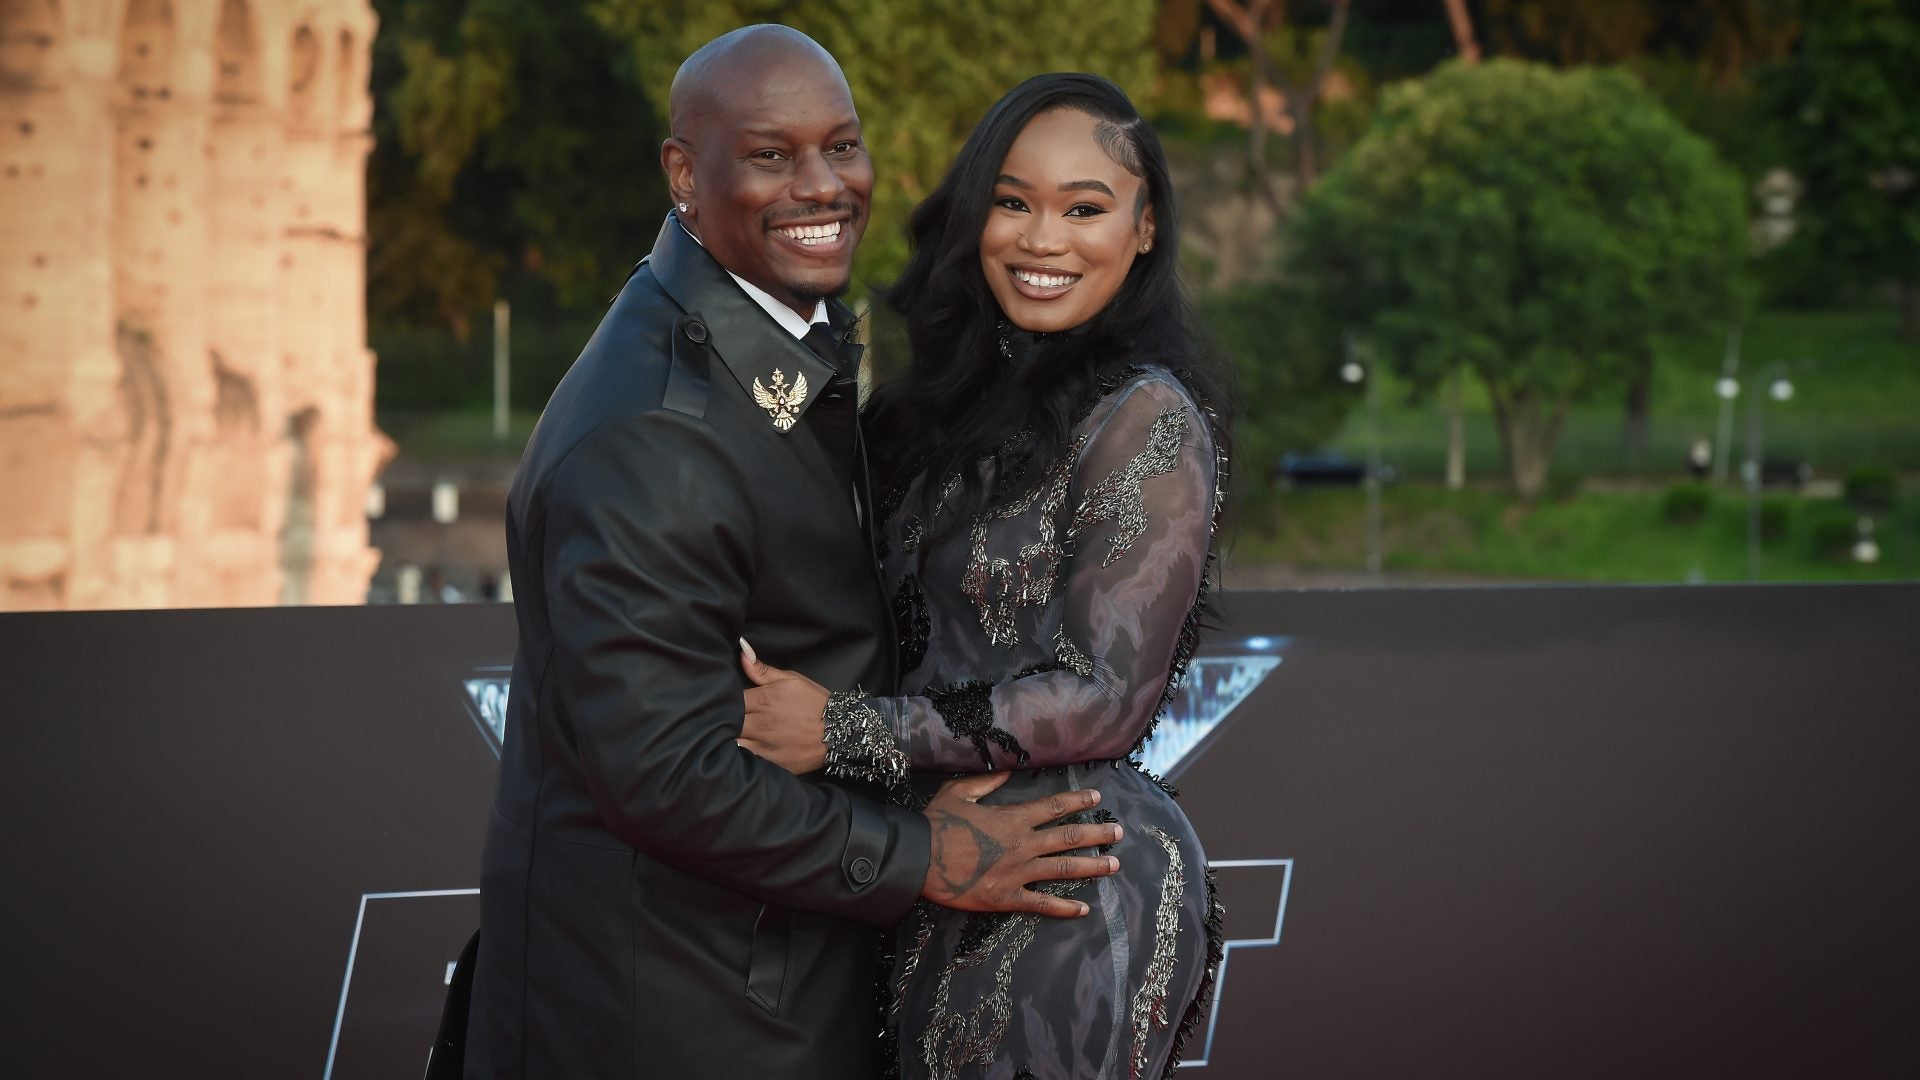 Tyrese Gifts Girlfriend Zelie Timothy This Luxury Car For Her Birthday